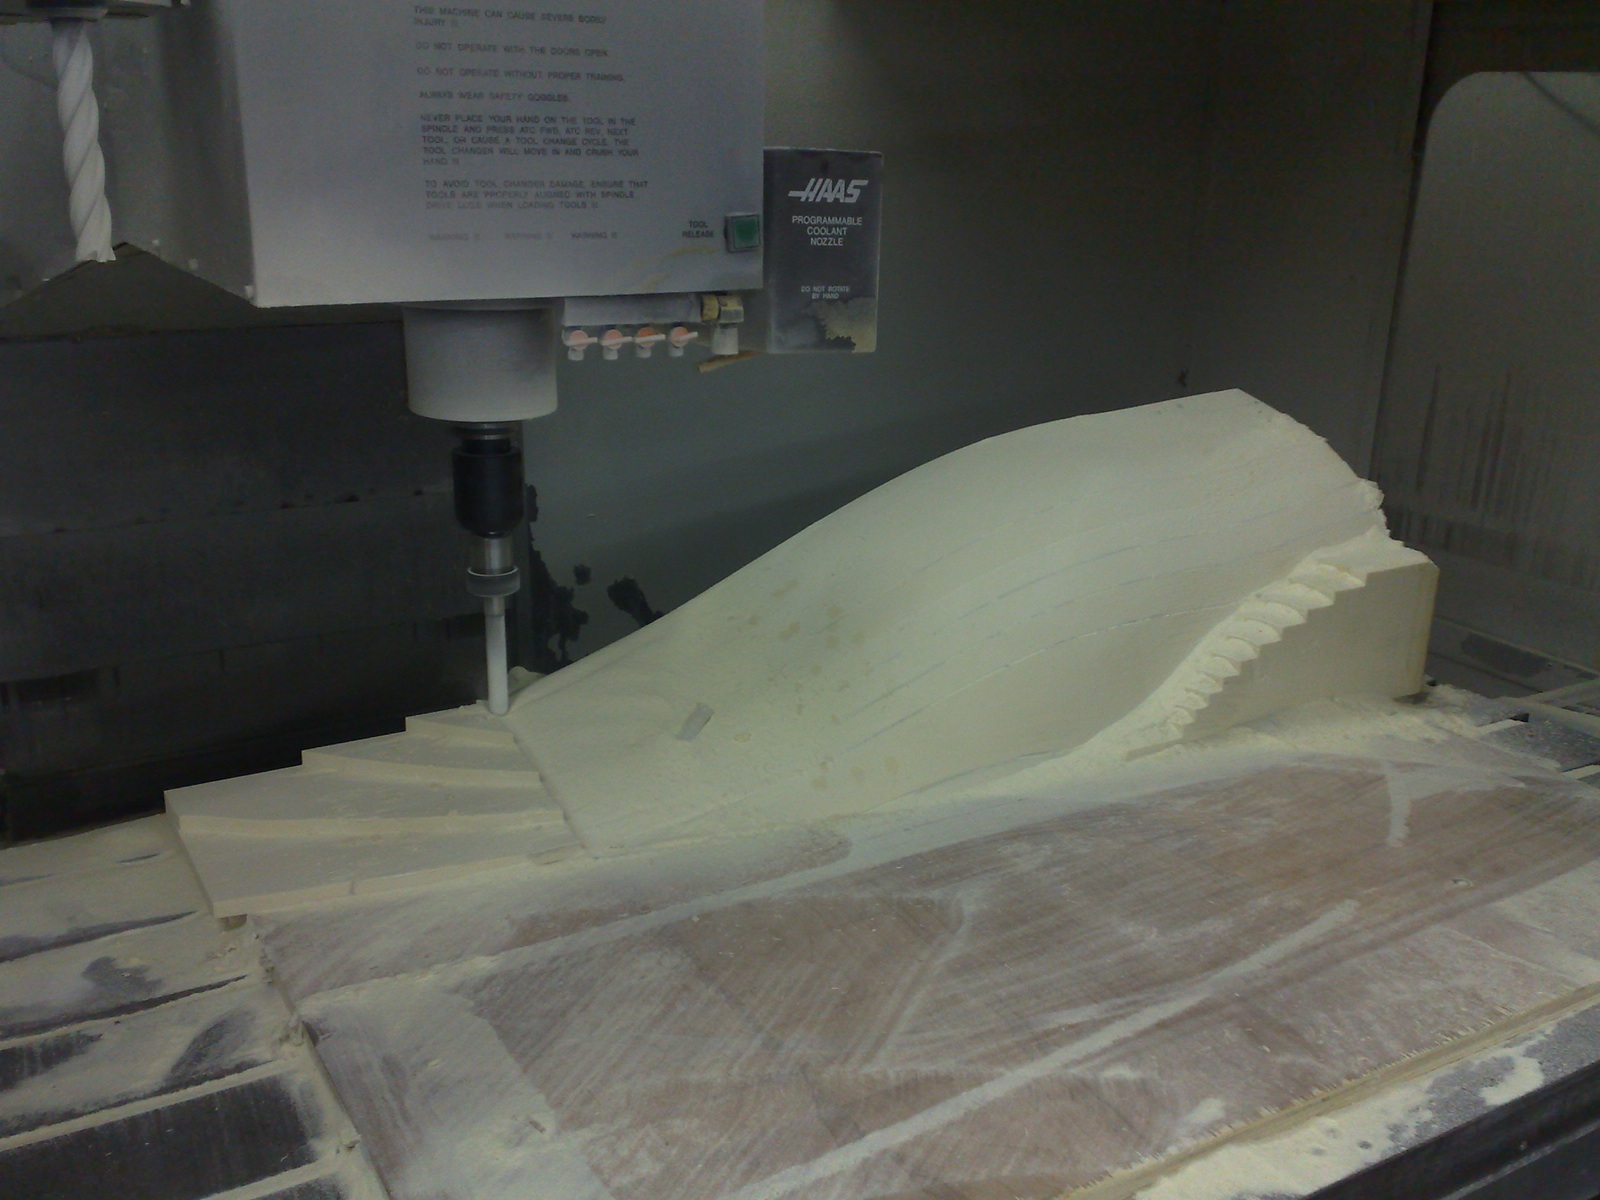 Fairing side section being cut by the Haas Router